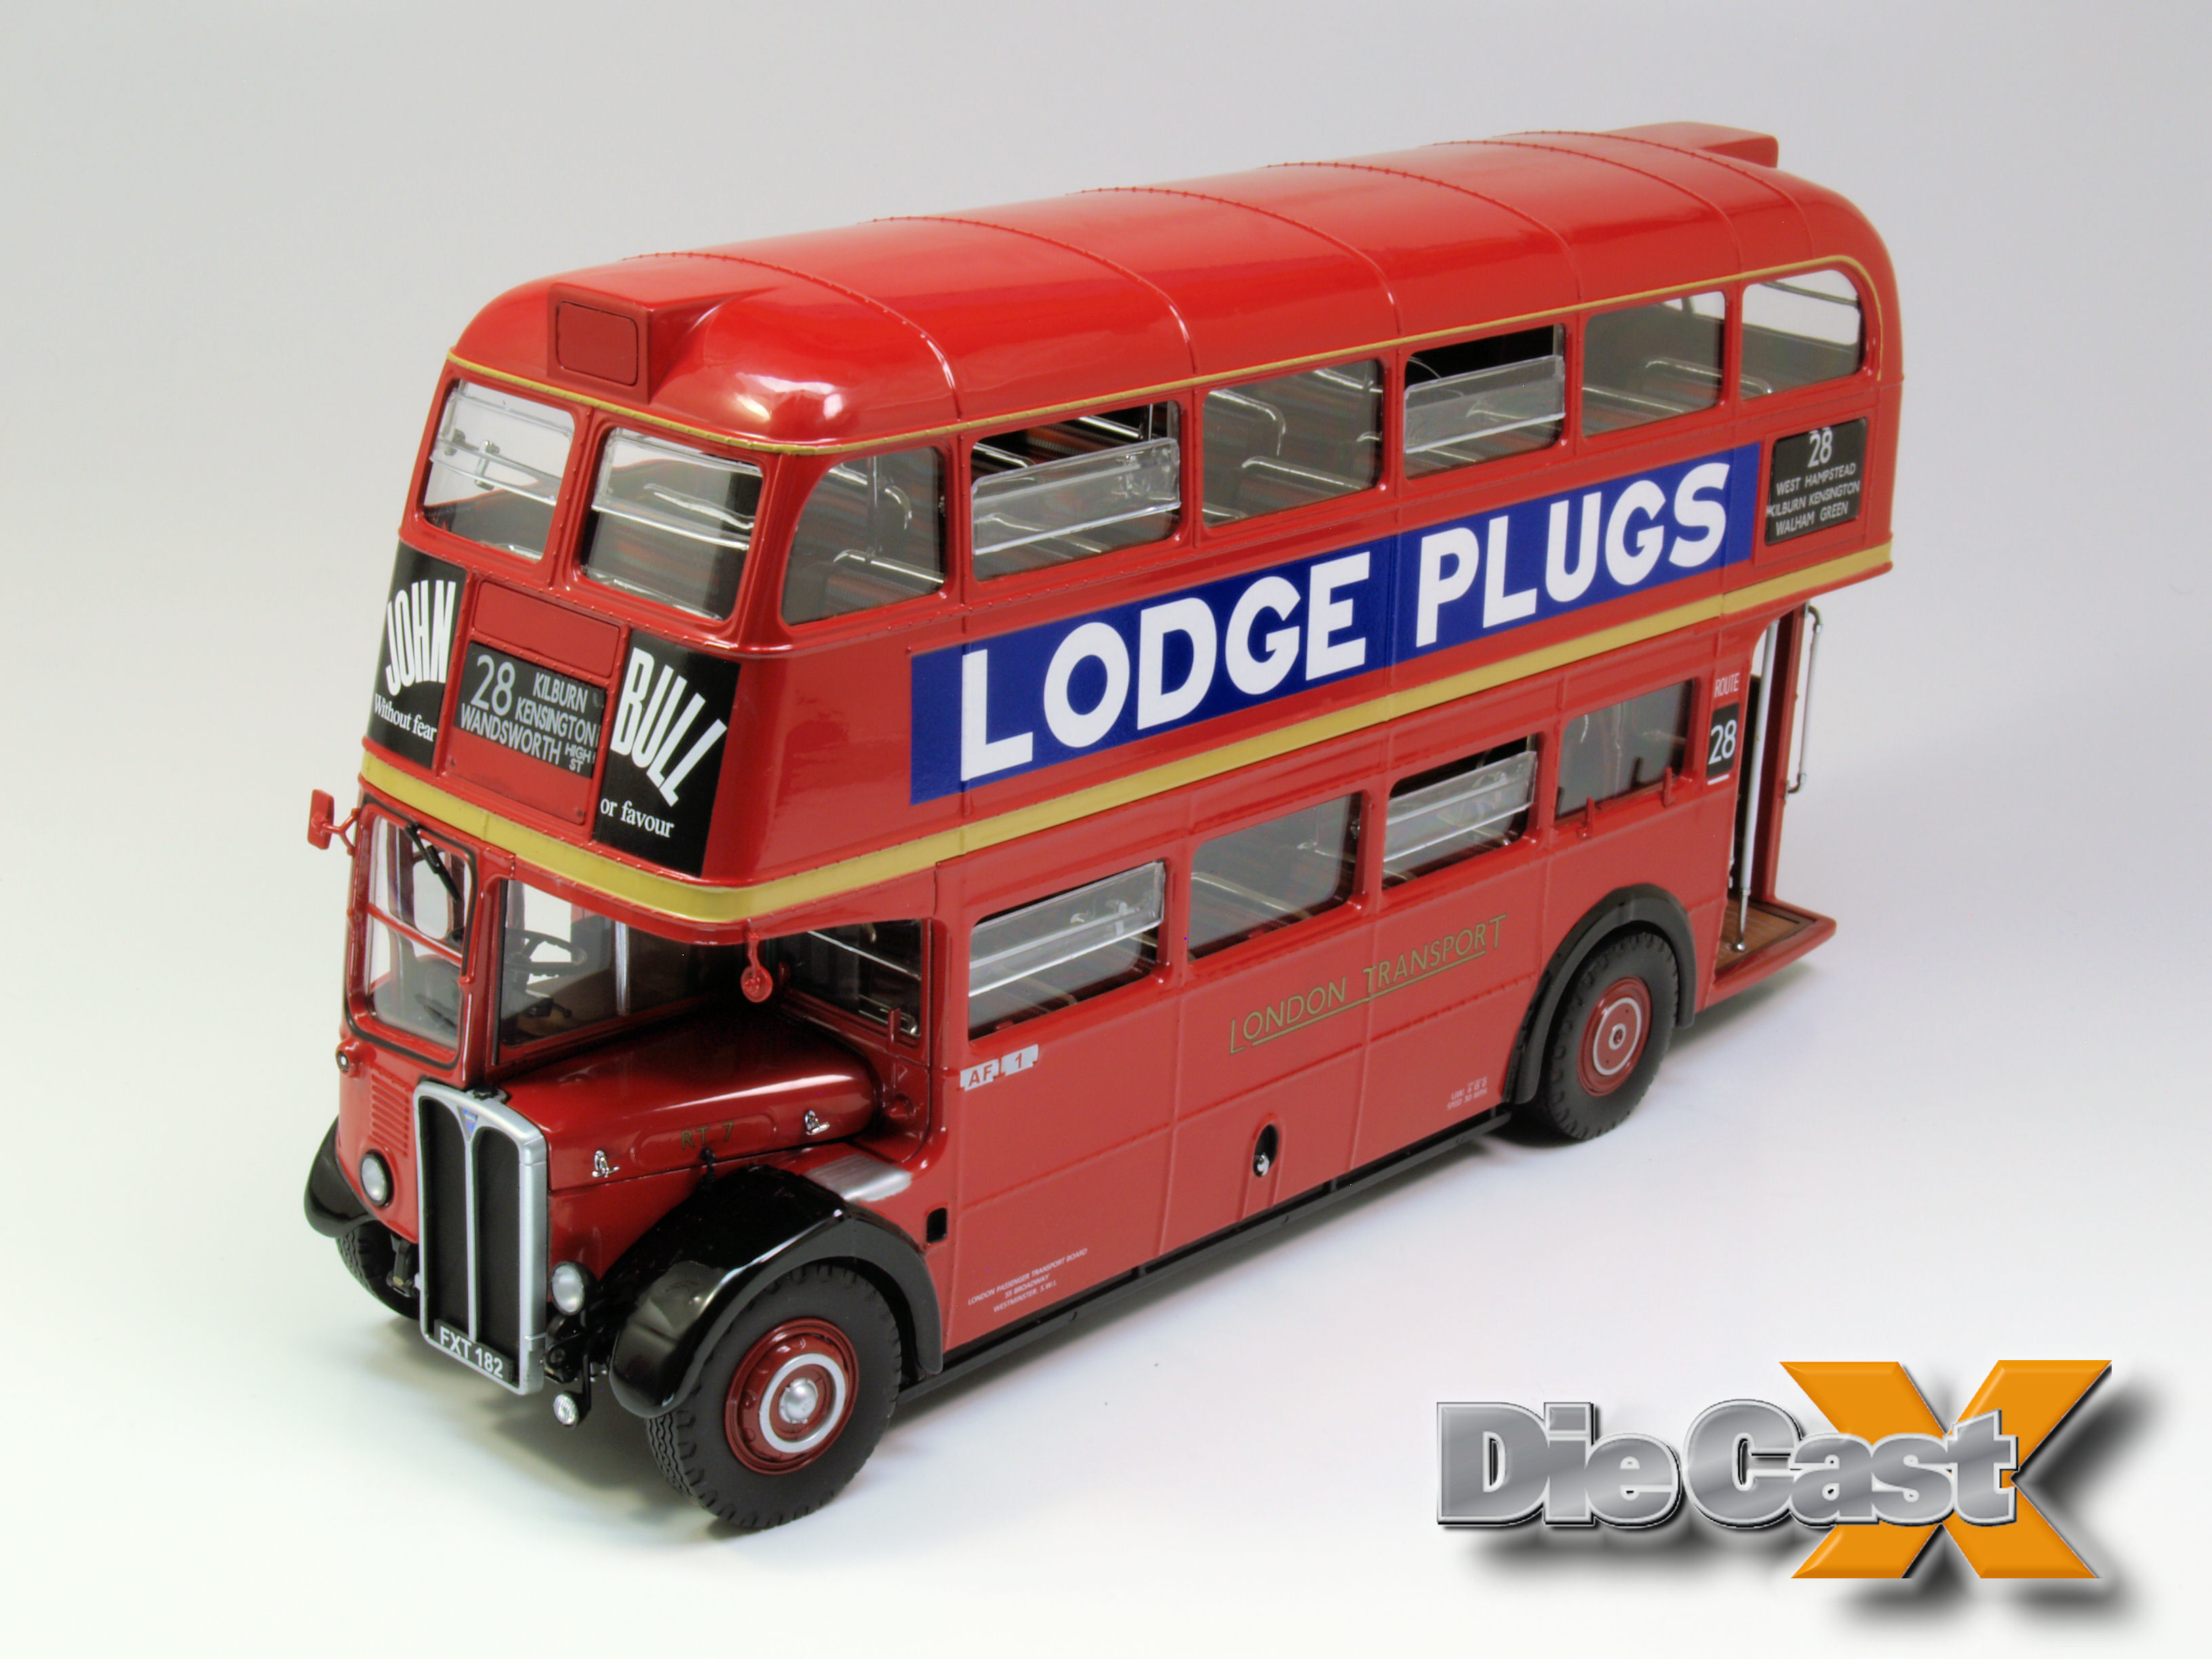 Diecast 1:32 Scale model Classic Bus Tampo print pull back and go action Red